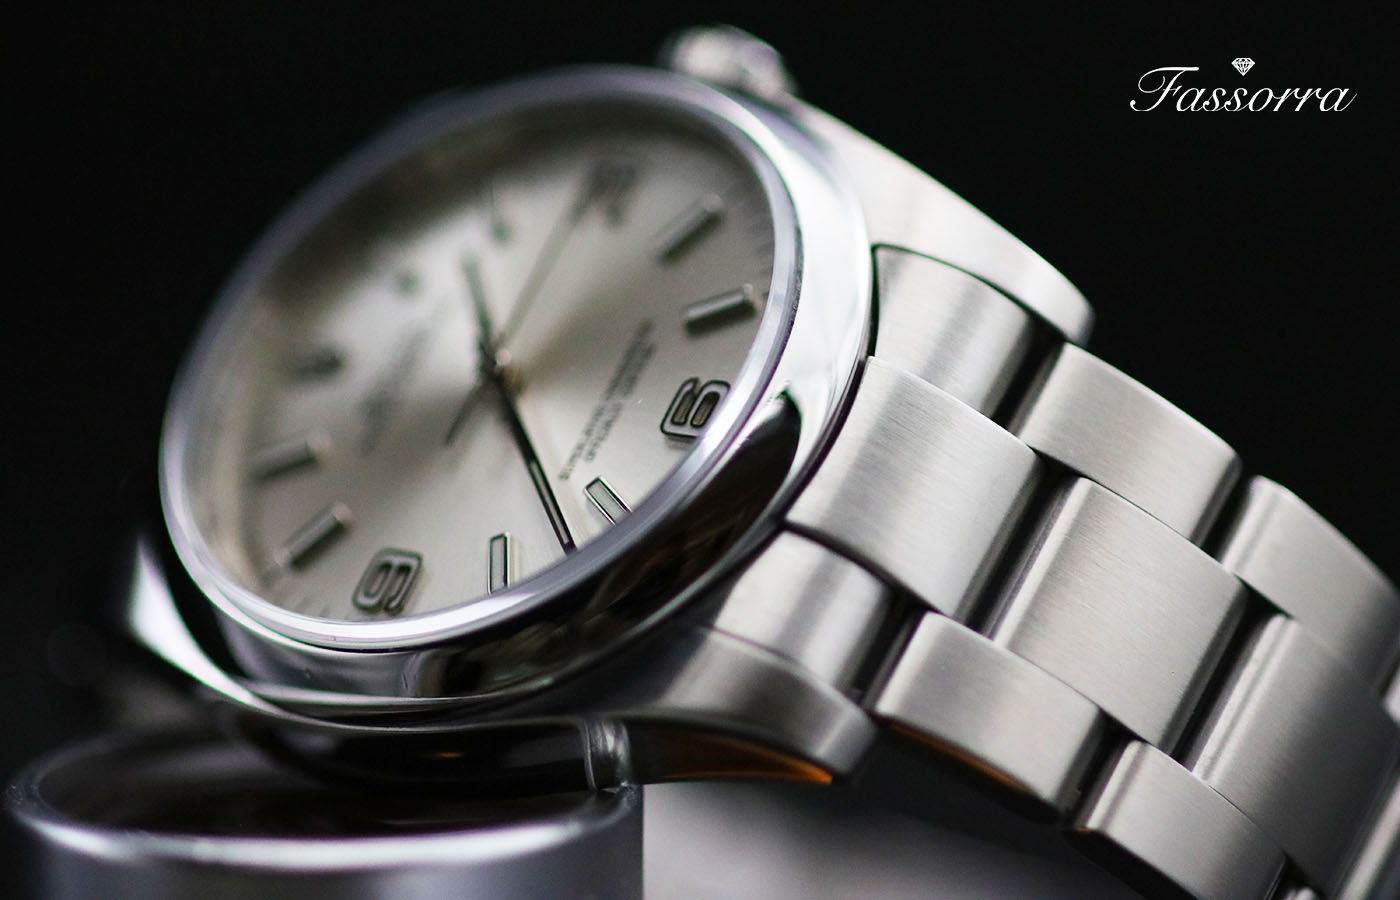 Rolex Oyster Perpetual 116000